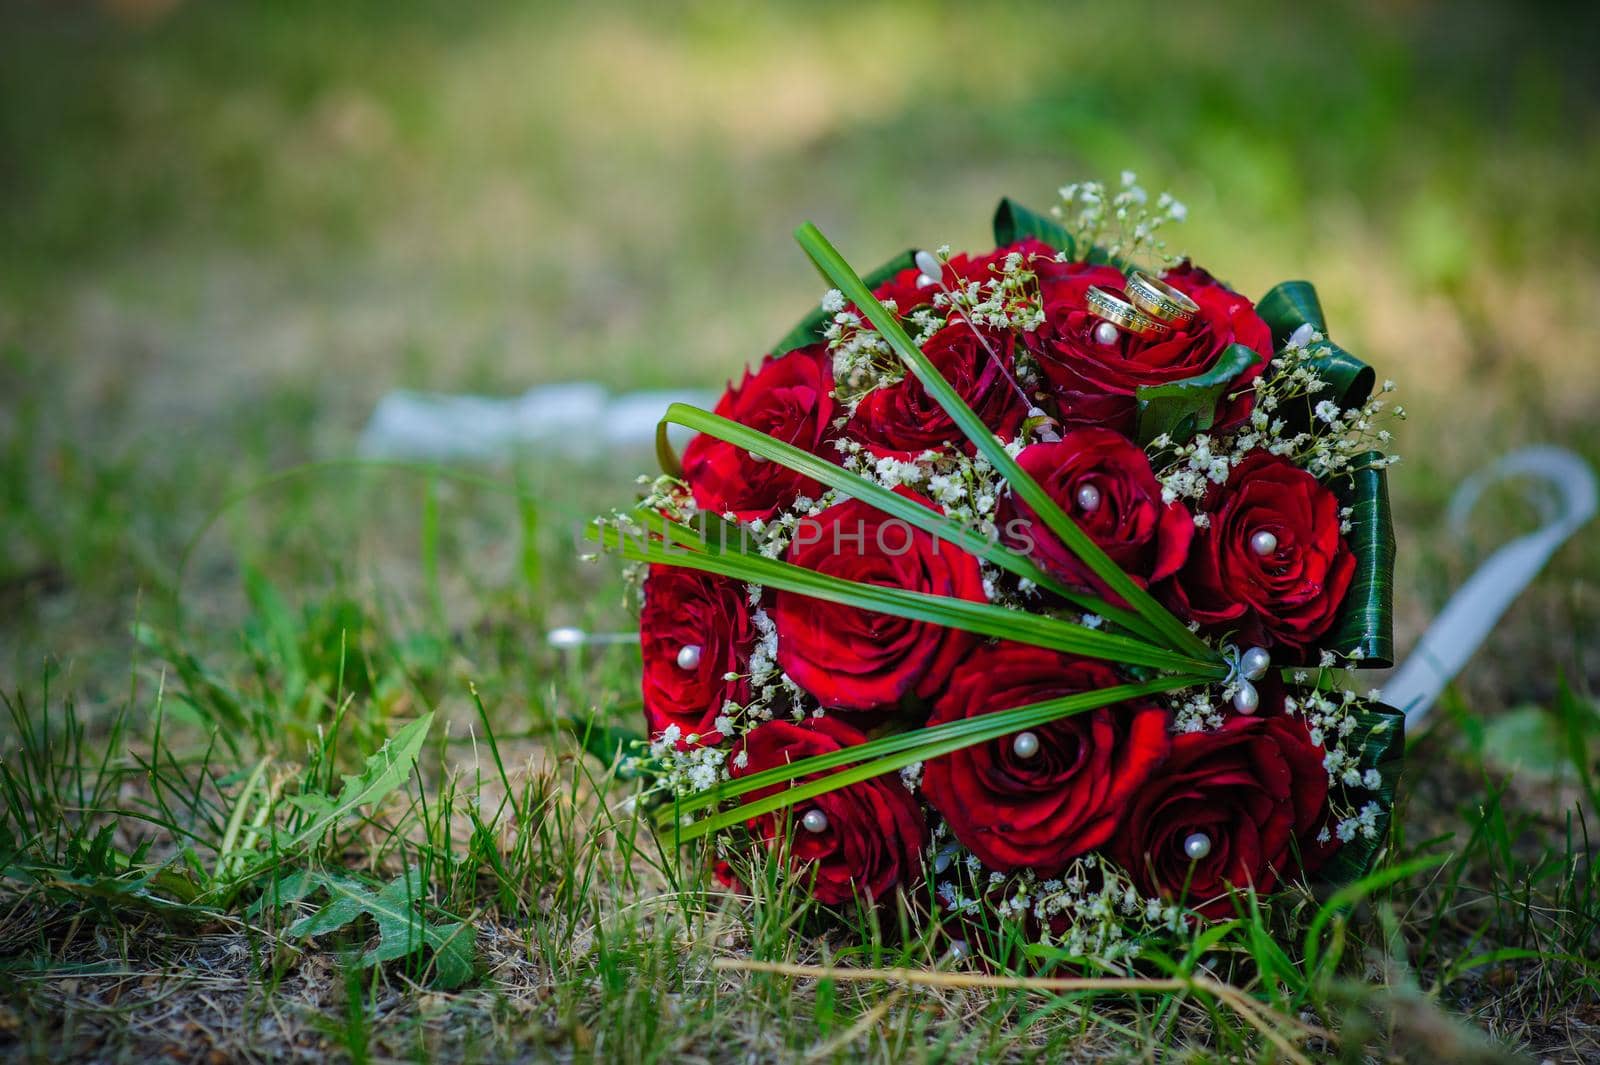 Bridal wedding bouquet of flowers. Wedding bouquet of red roses lying on a grass.